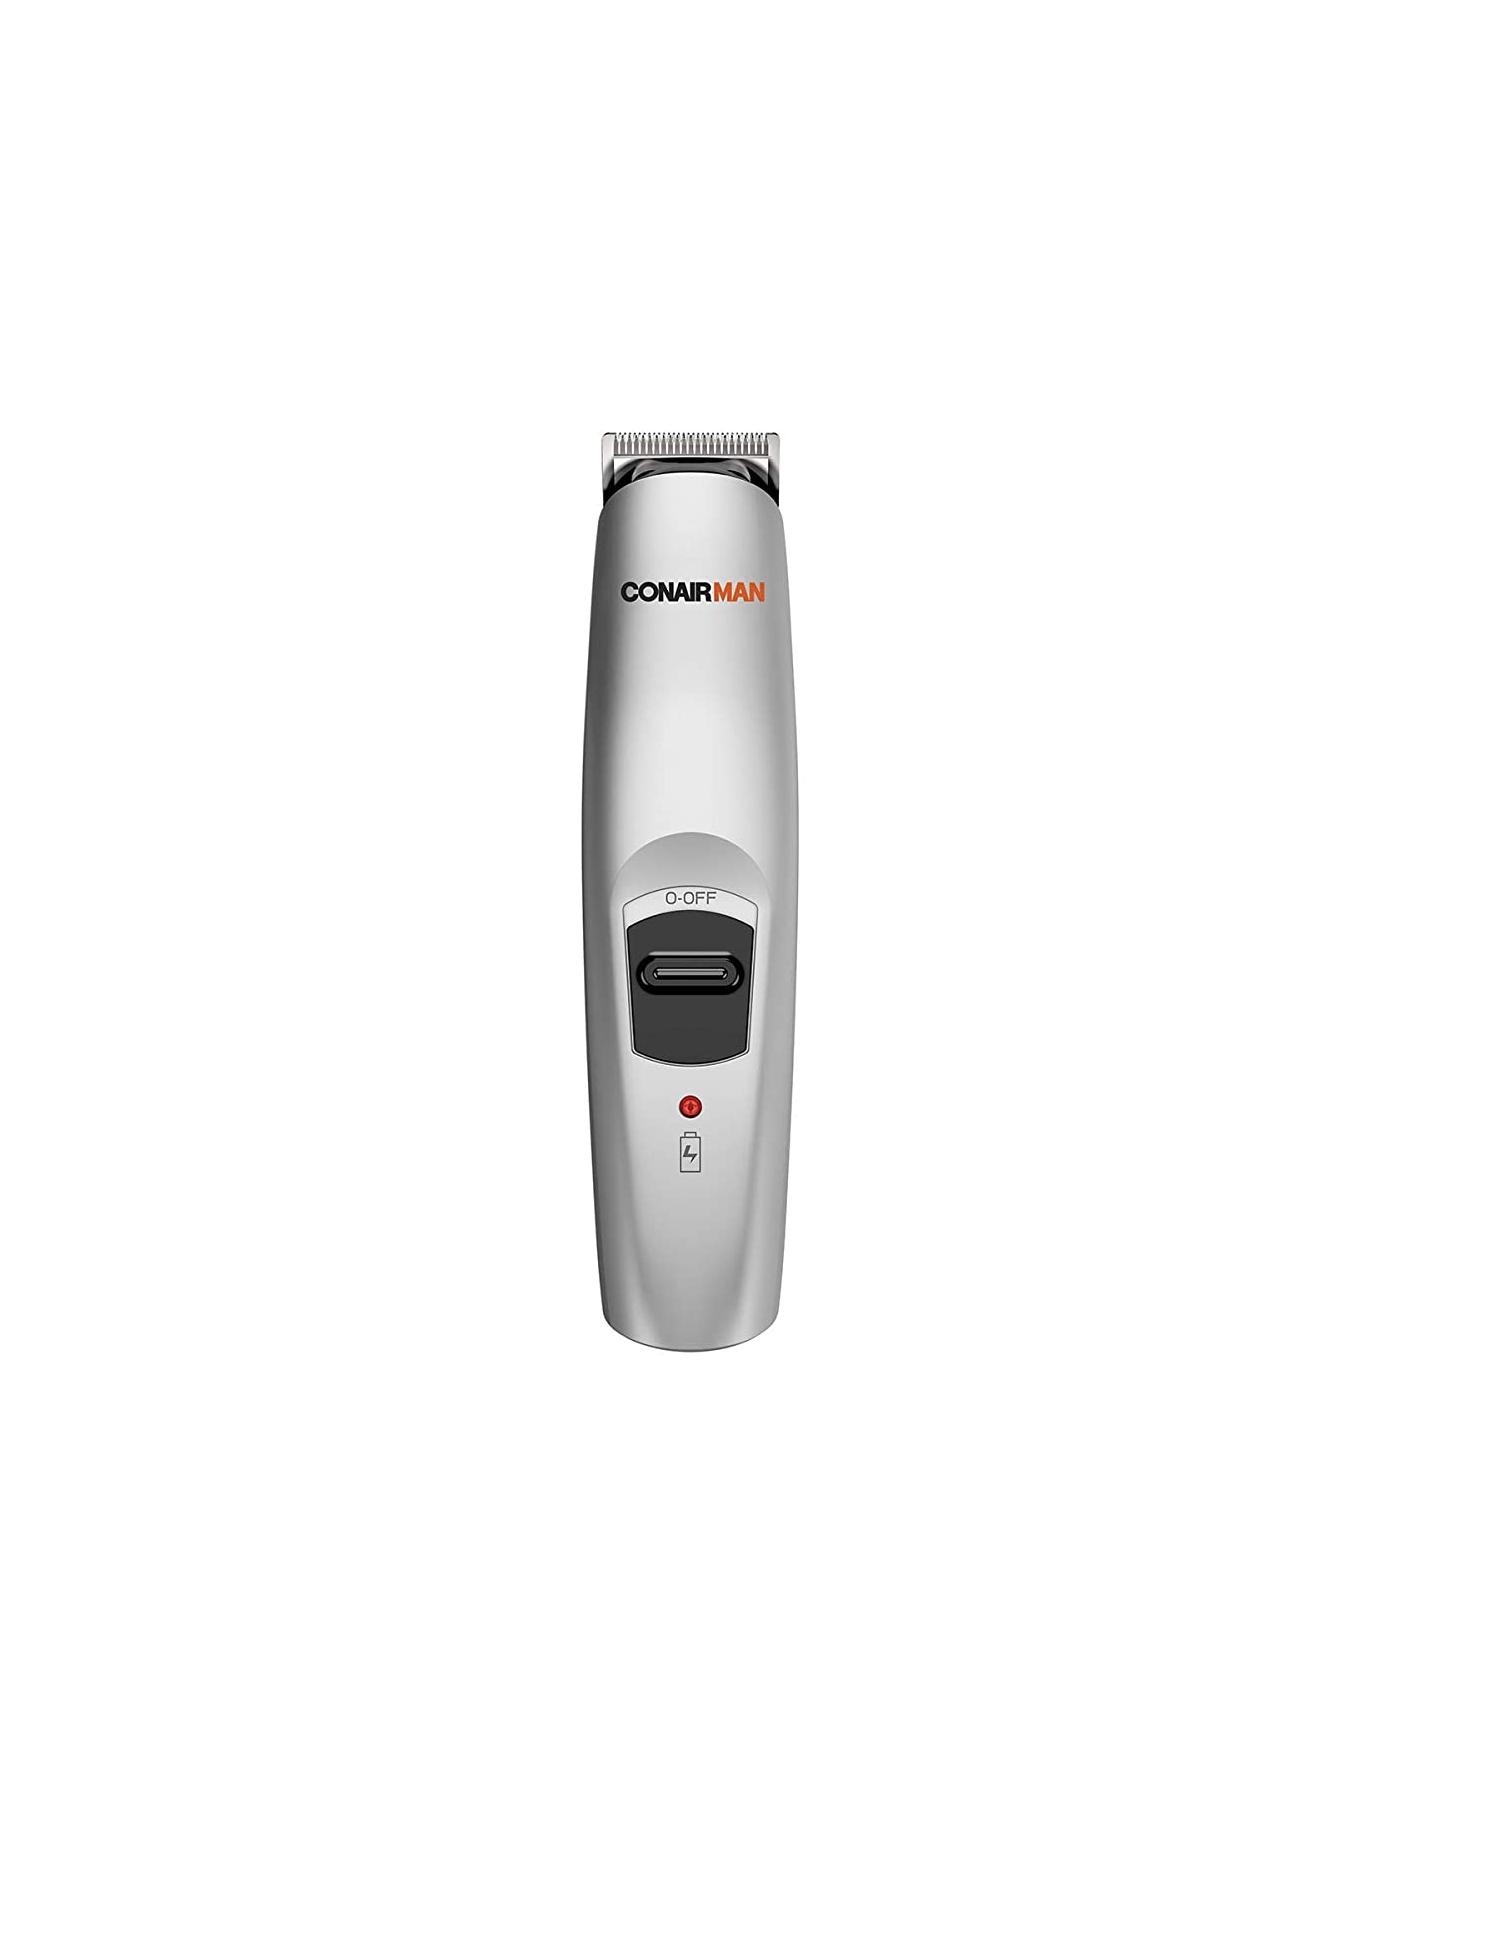 electric brow shaver